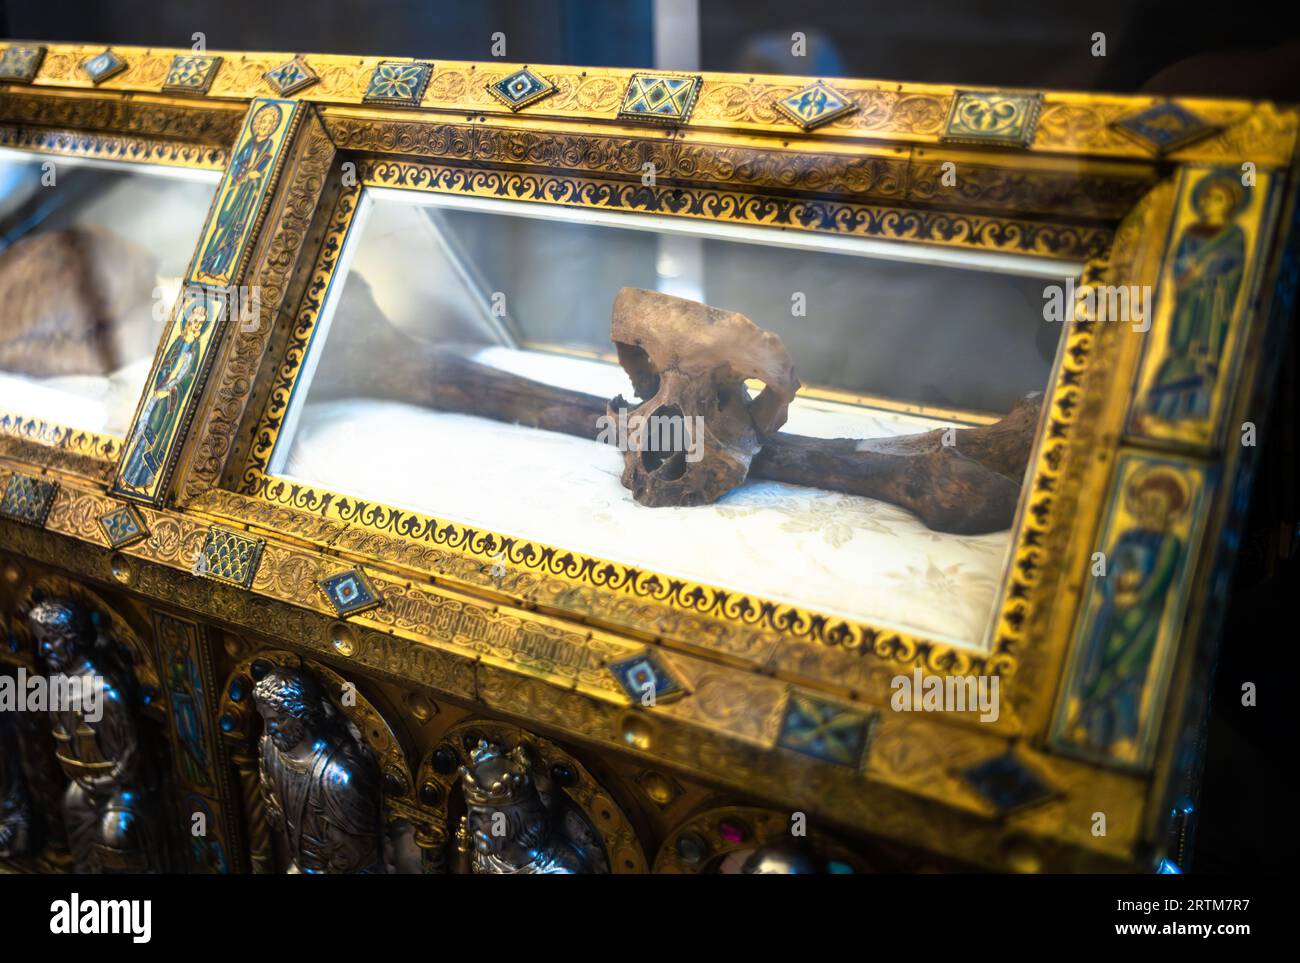 A relic in a a silver gilt reliquary in the Catholic cathedral of St Peter and St Paul iin Troyes, France that is reputed to be from Saint Savinien, t Stock Photo